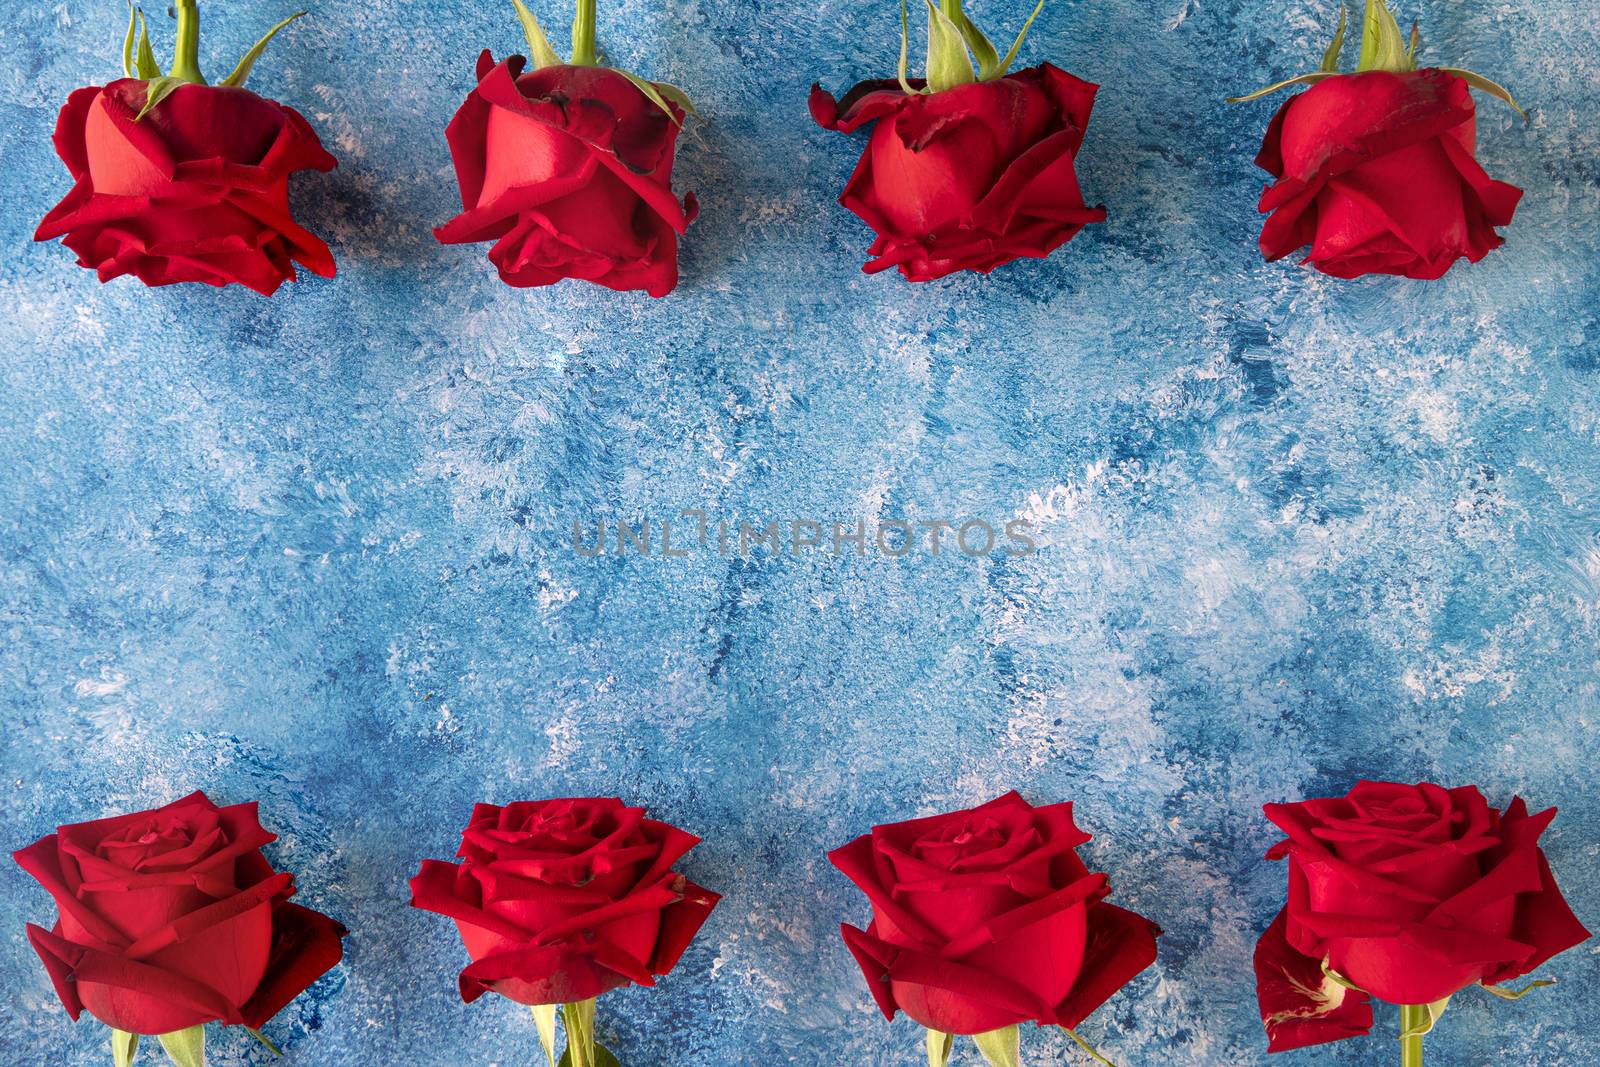 A red rose on arylic paint background by Nawoot